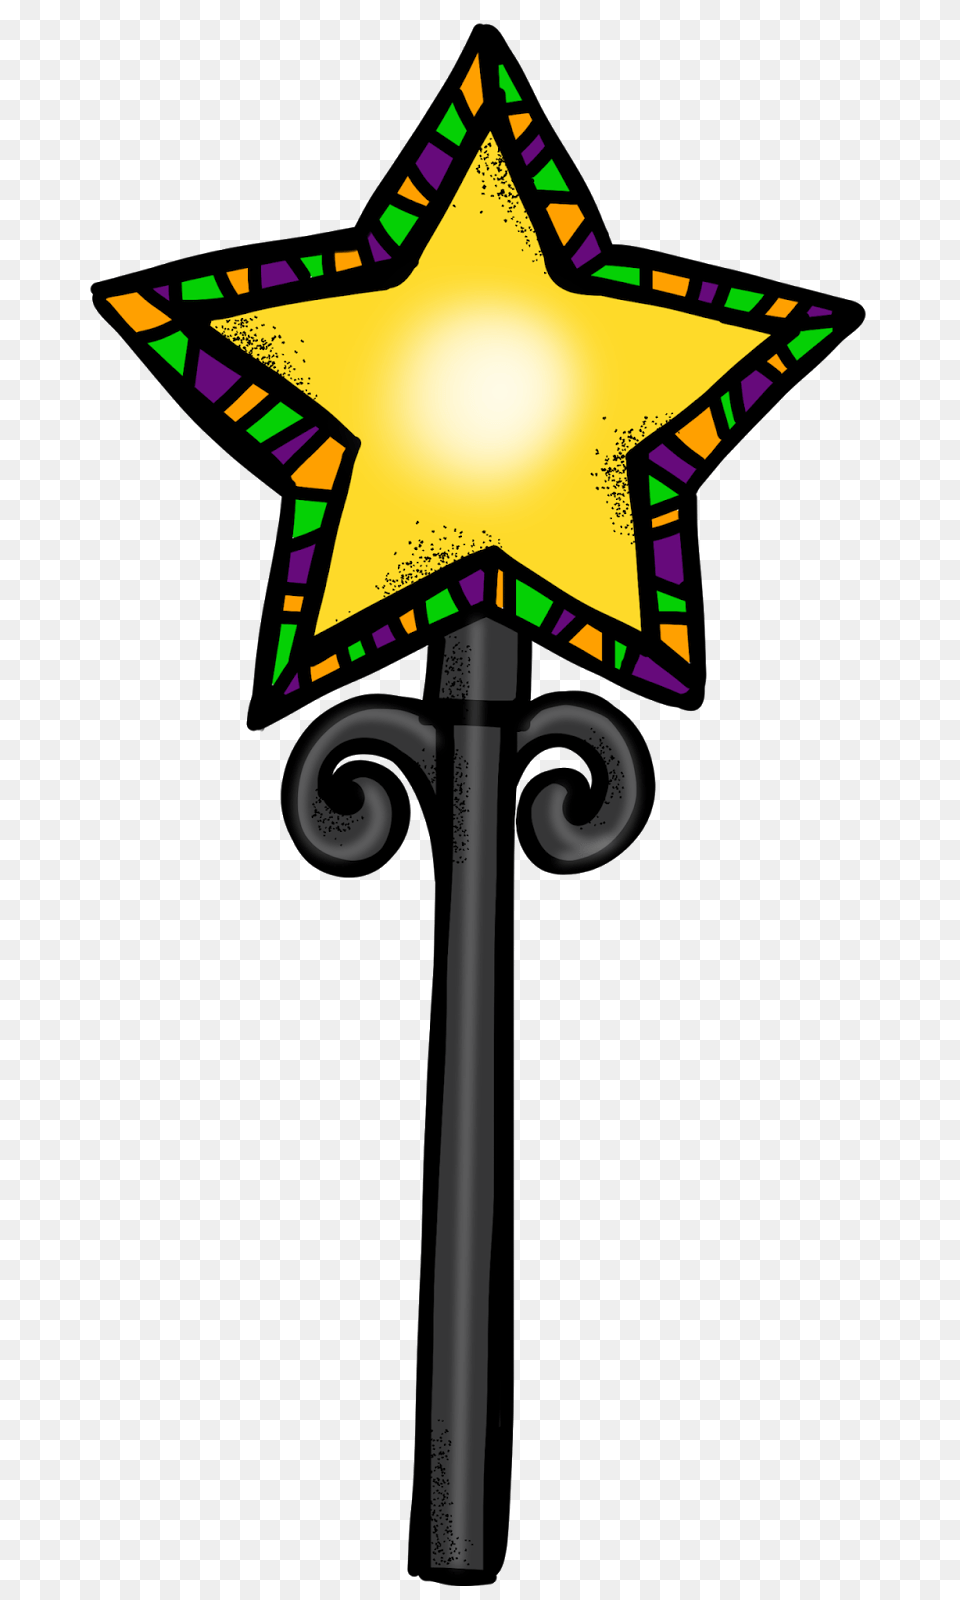 Candy Contest Update And Witchs Wand Clipart Freebies, Symbol, Star Symbol, Cross Free Transparent Png